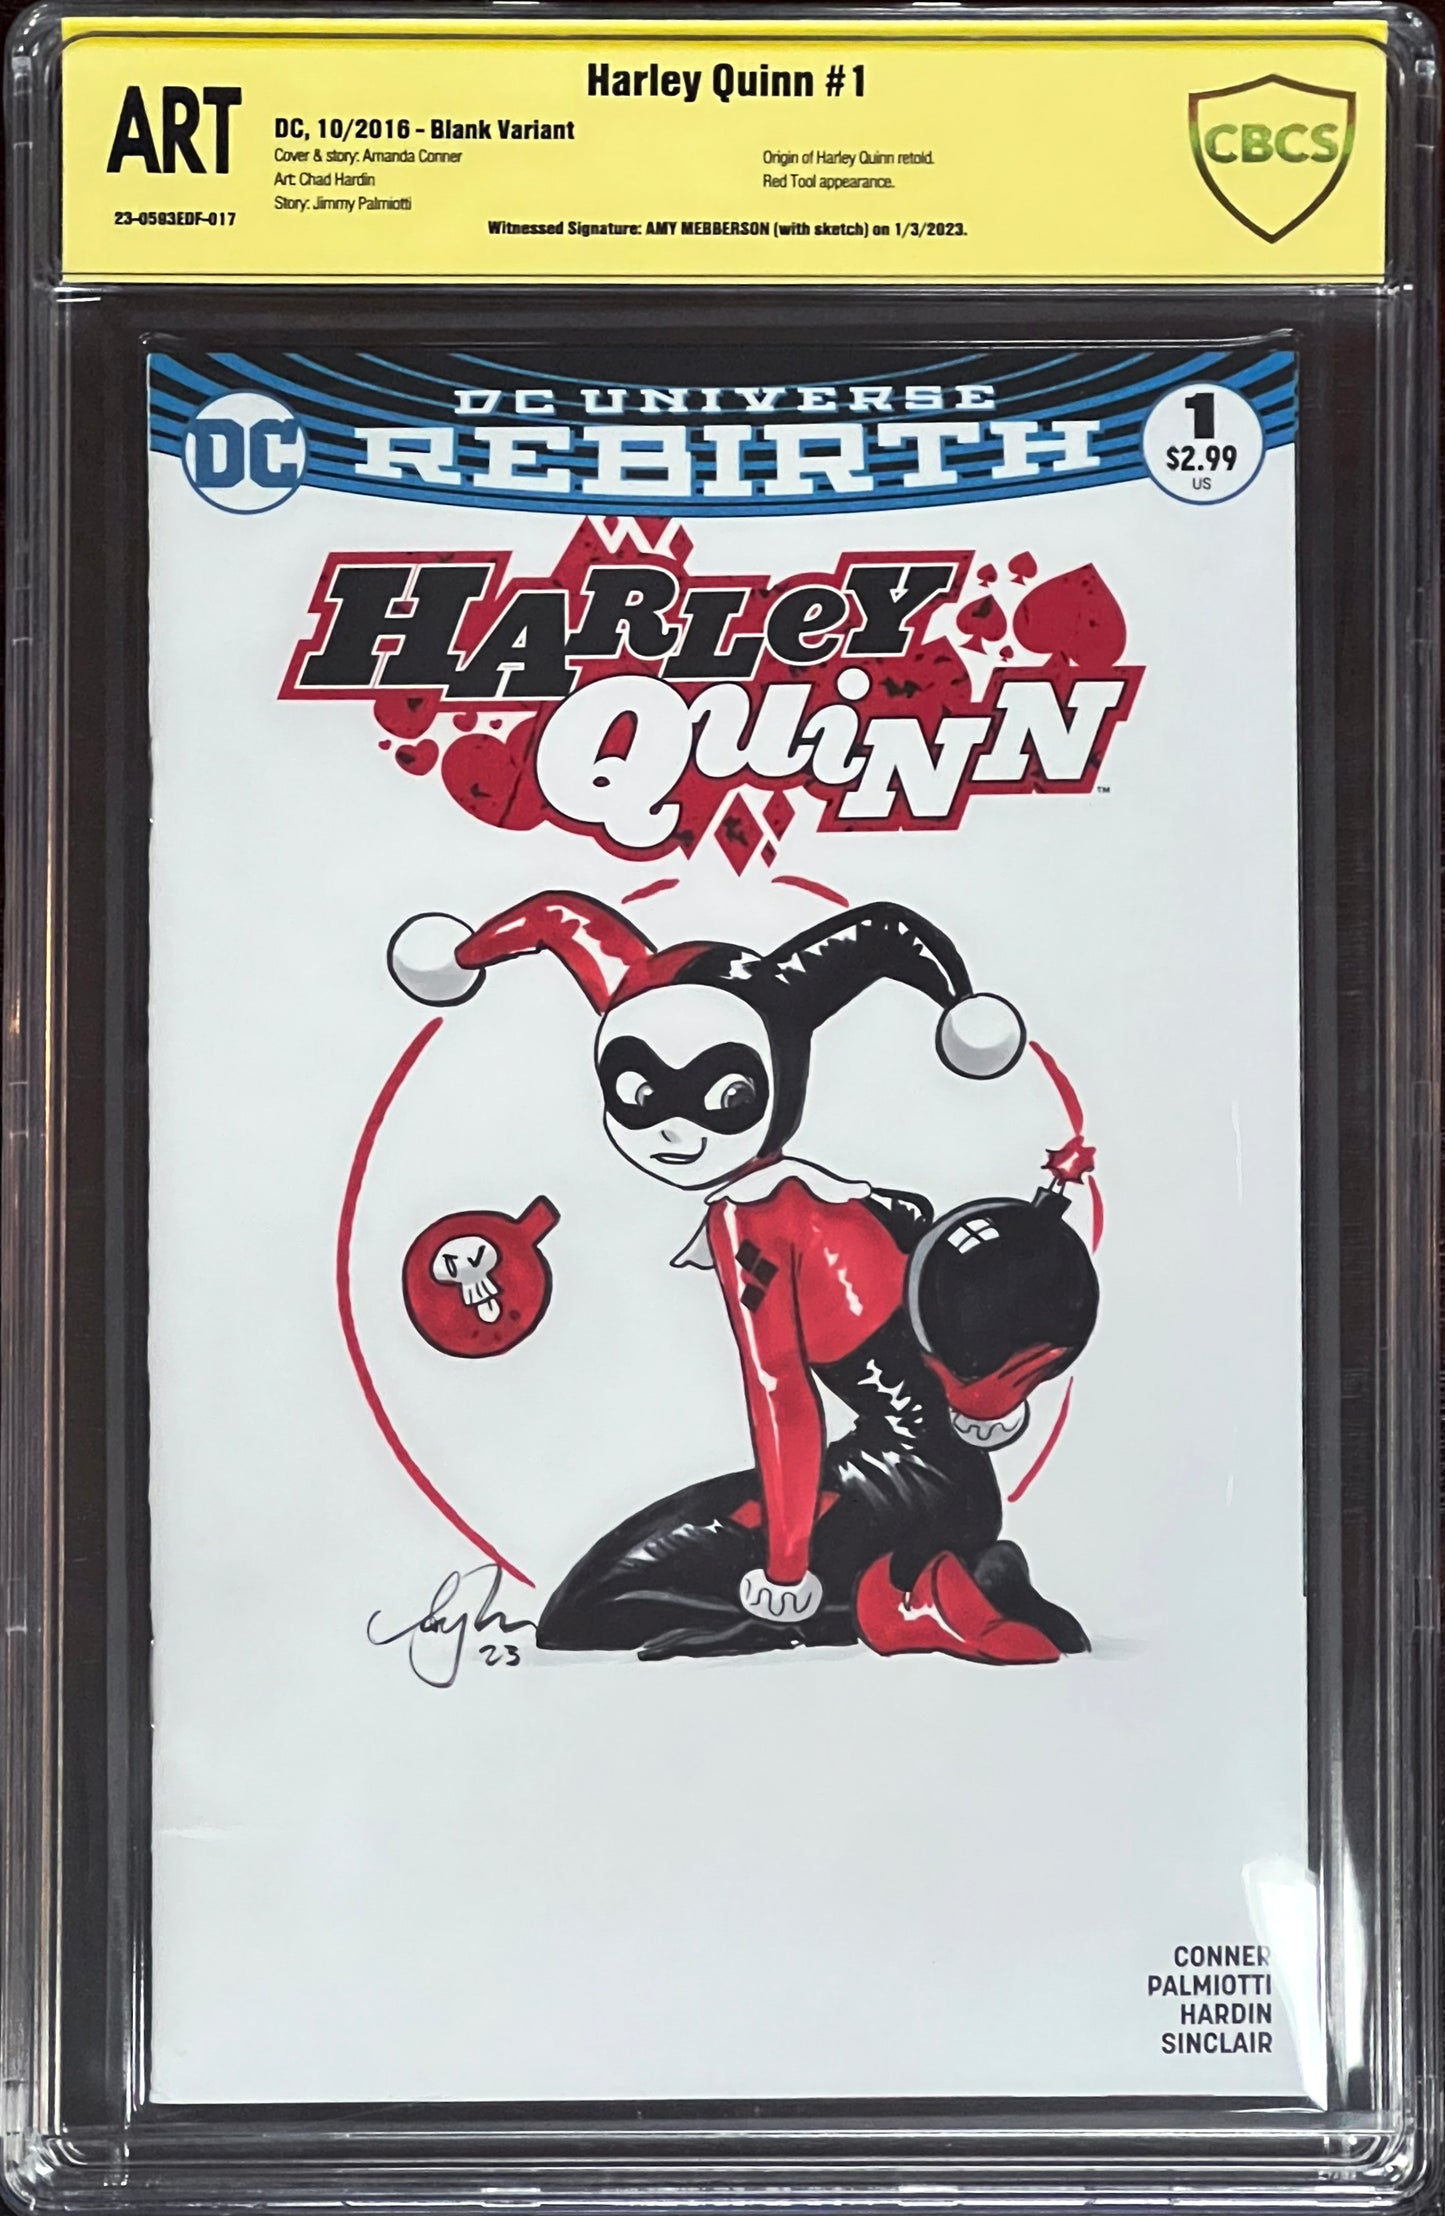 Harley Quinn #1 - Original Amy Mebberson Front Cover Sketch